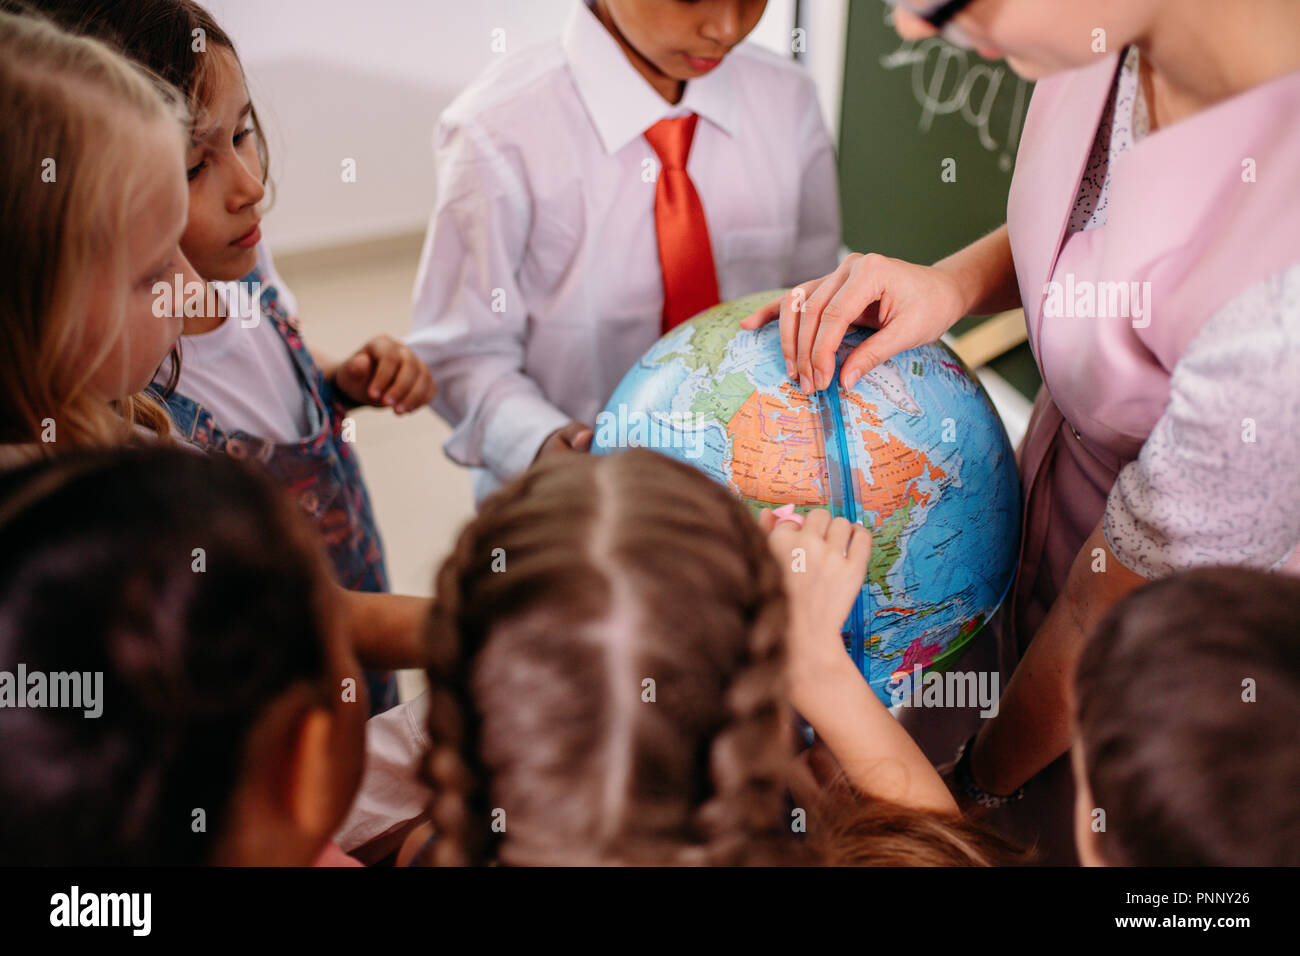 schoolchilds looking at globe with teacher at geography lesson Stock Photo